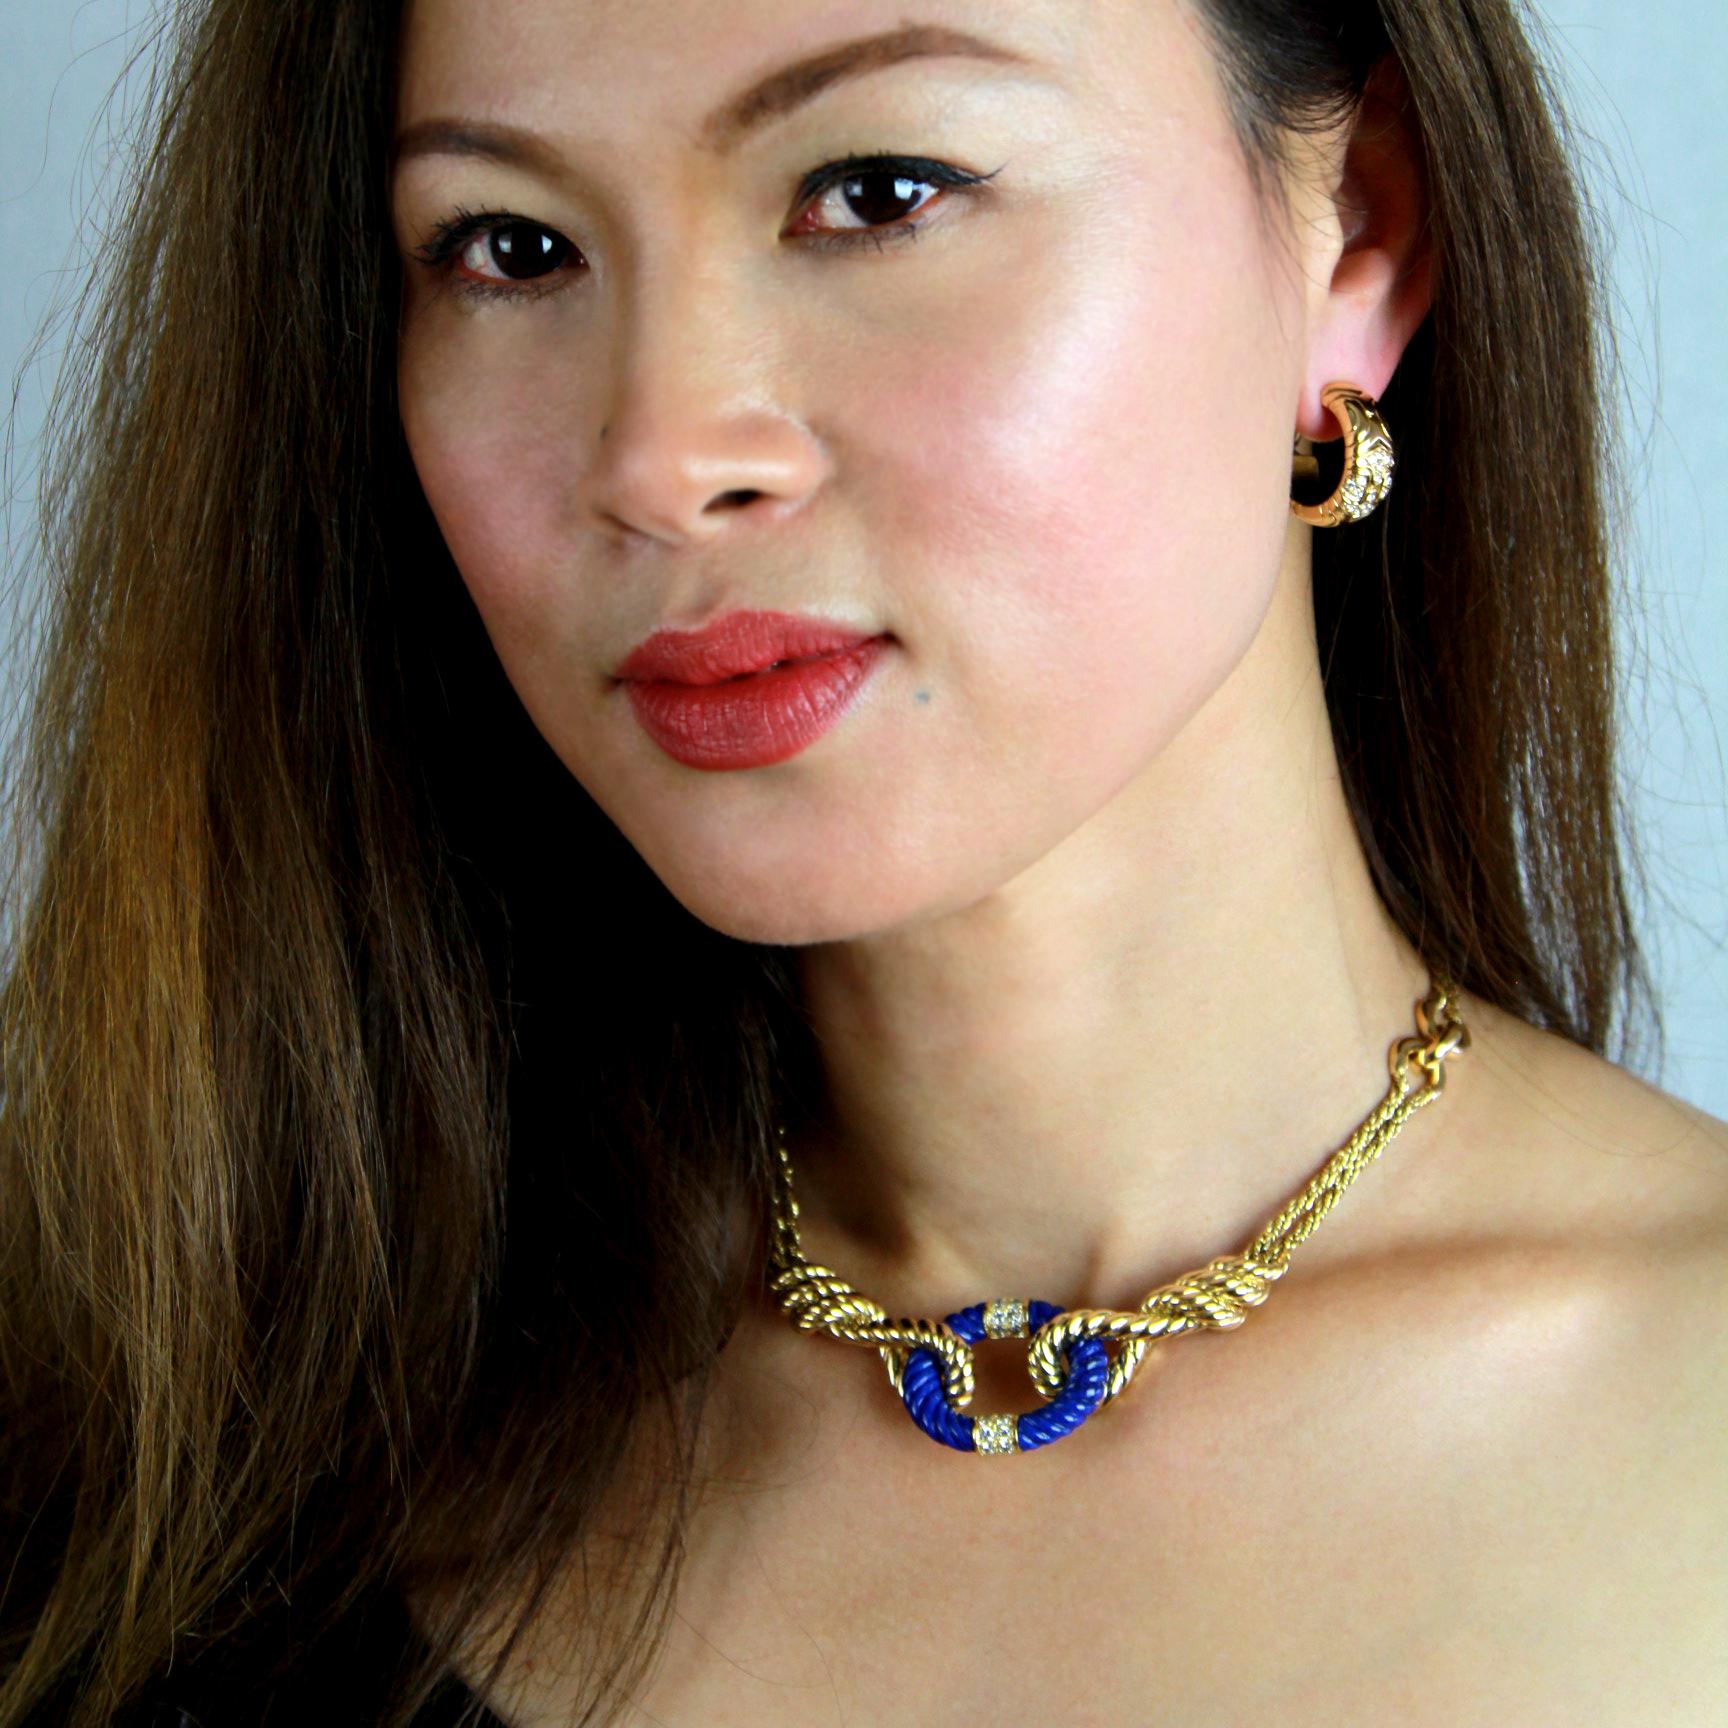 Retro 1970 VanCleef and Arpels necklace in 18 karat twists of yellow gold loop elegantly around an oval hoop of bright blue Lapis lazuli in this stunning nautical-inspired necklace. The Lapis hoop, also designed to resemble rope, is decorated with